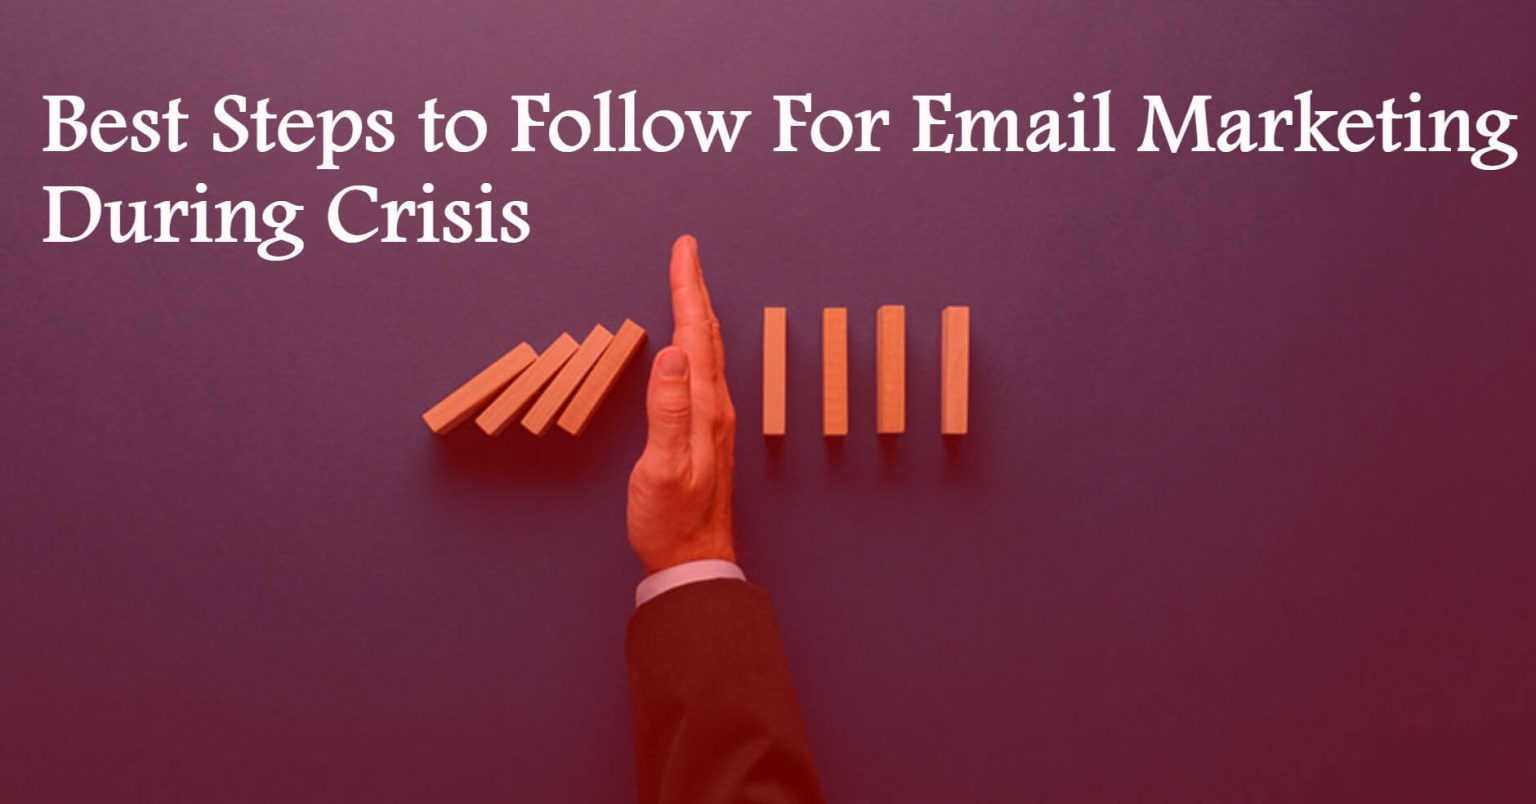 Best Steps to Follow For Email Marketing During Crisis